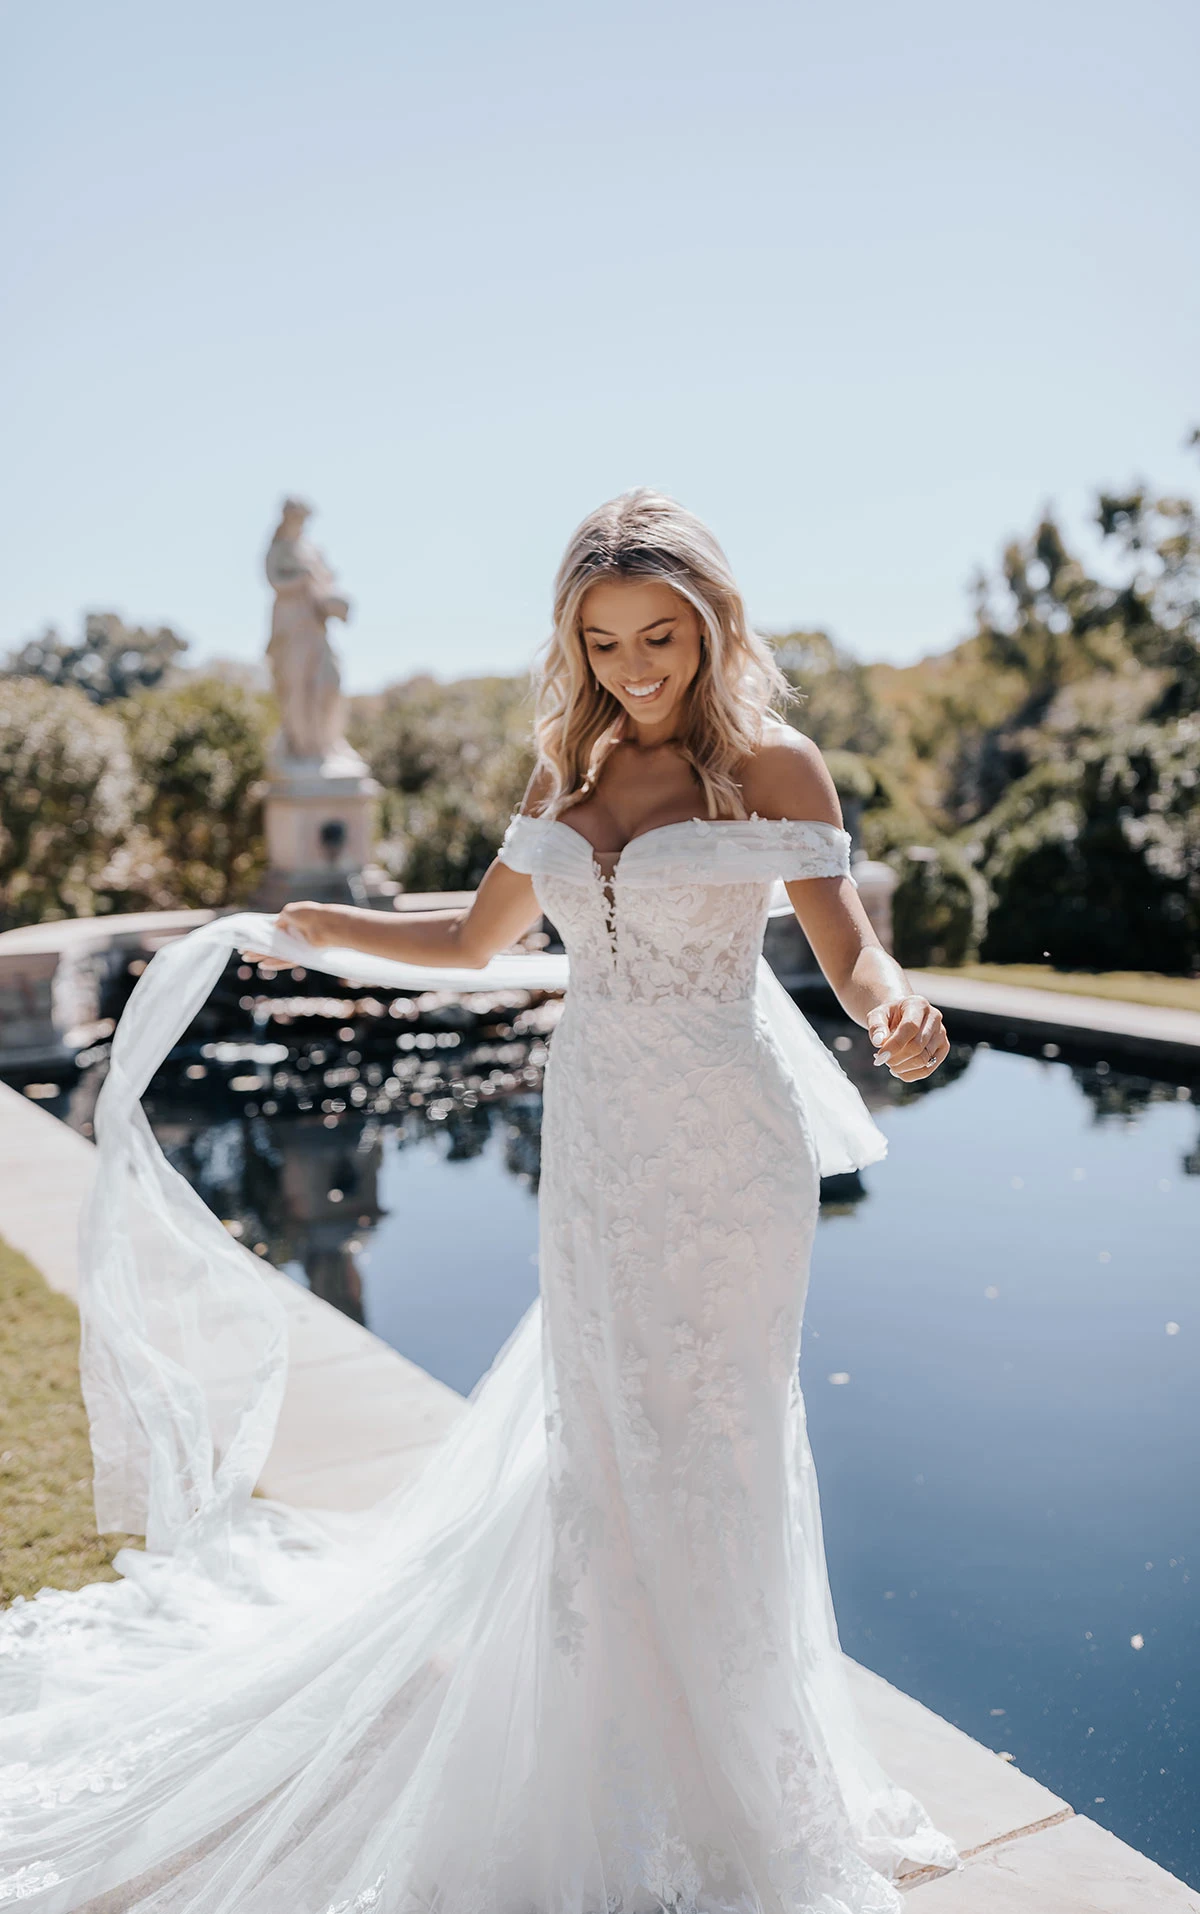 off-the-shoulder mermaid wedding dress with streamers - D3639 by Essense of Australia